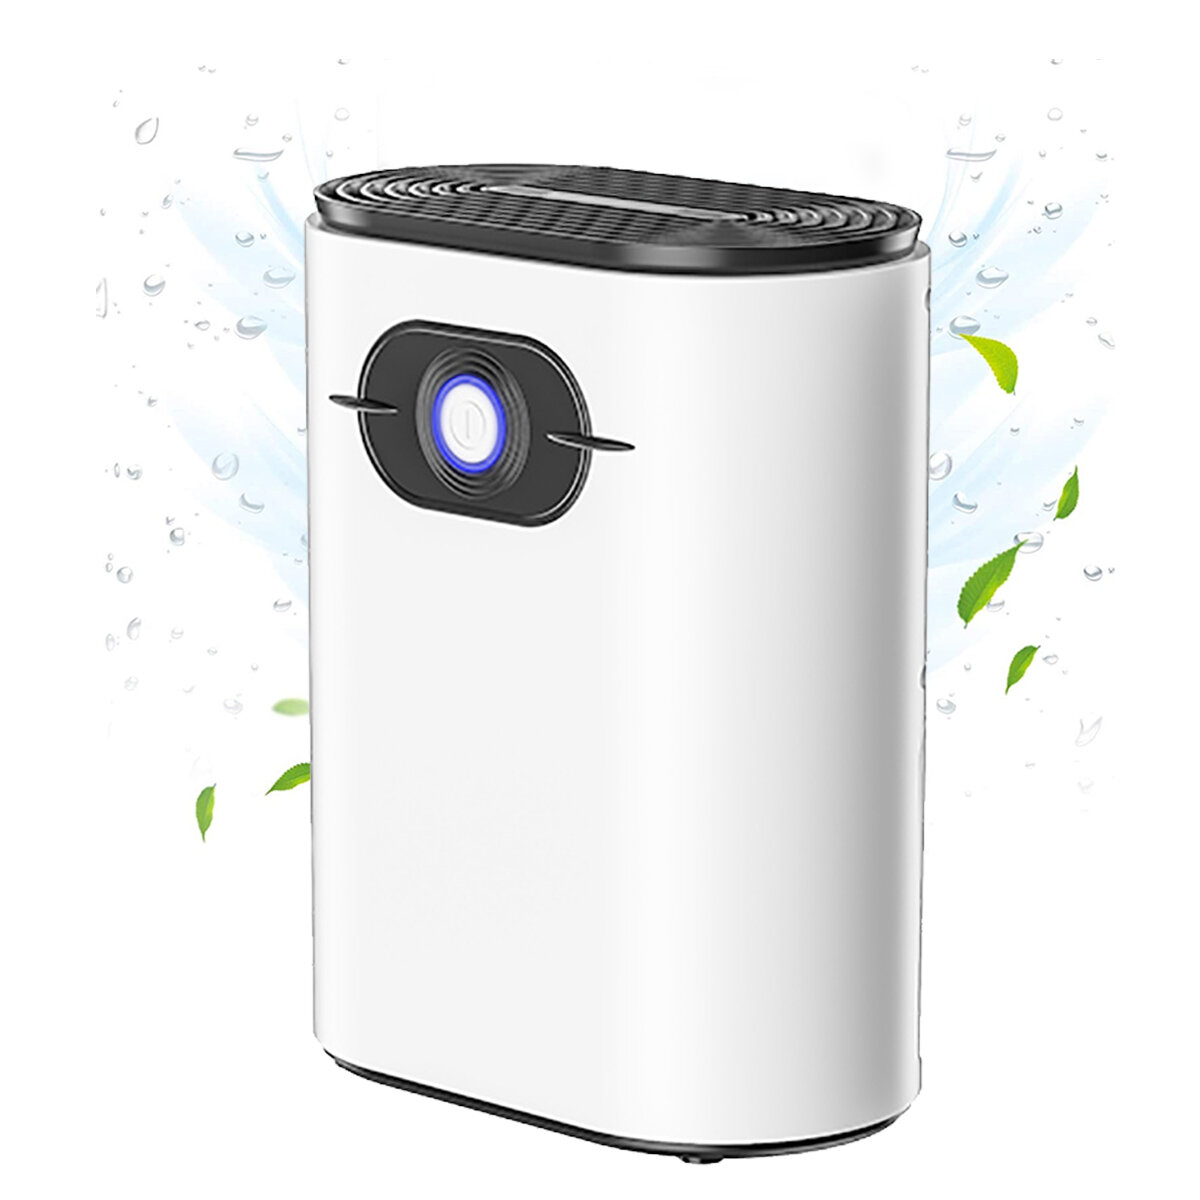 

1.2L Portable Semiconductor Dehumidifier Household Moisture-proof Energy-saving Electronic Automatic Shut-off Low Noise